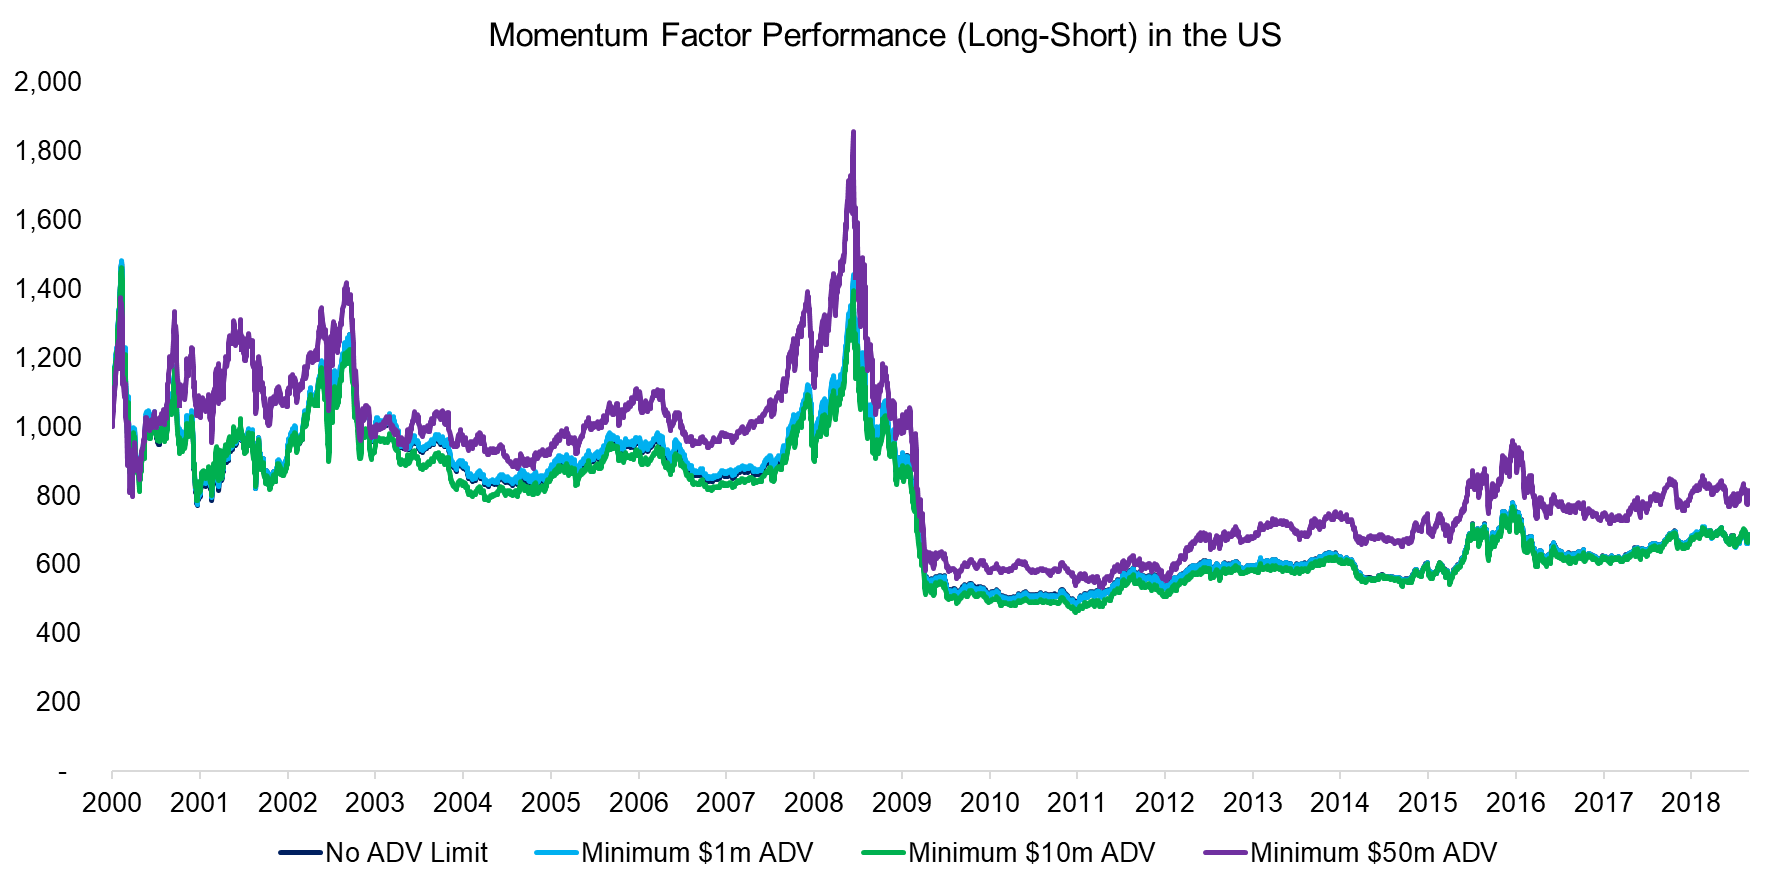 Momentum Factor Performance (Long-Short) in the US